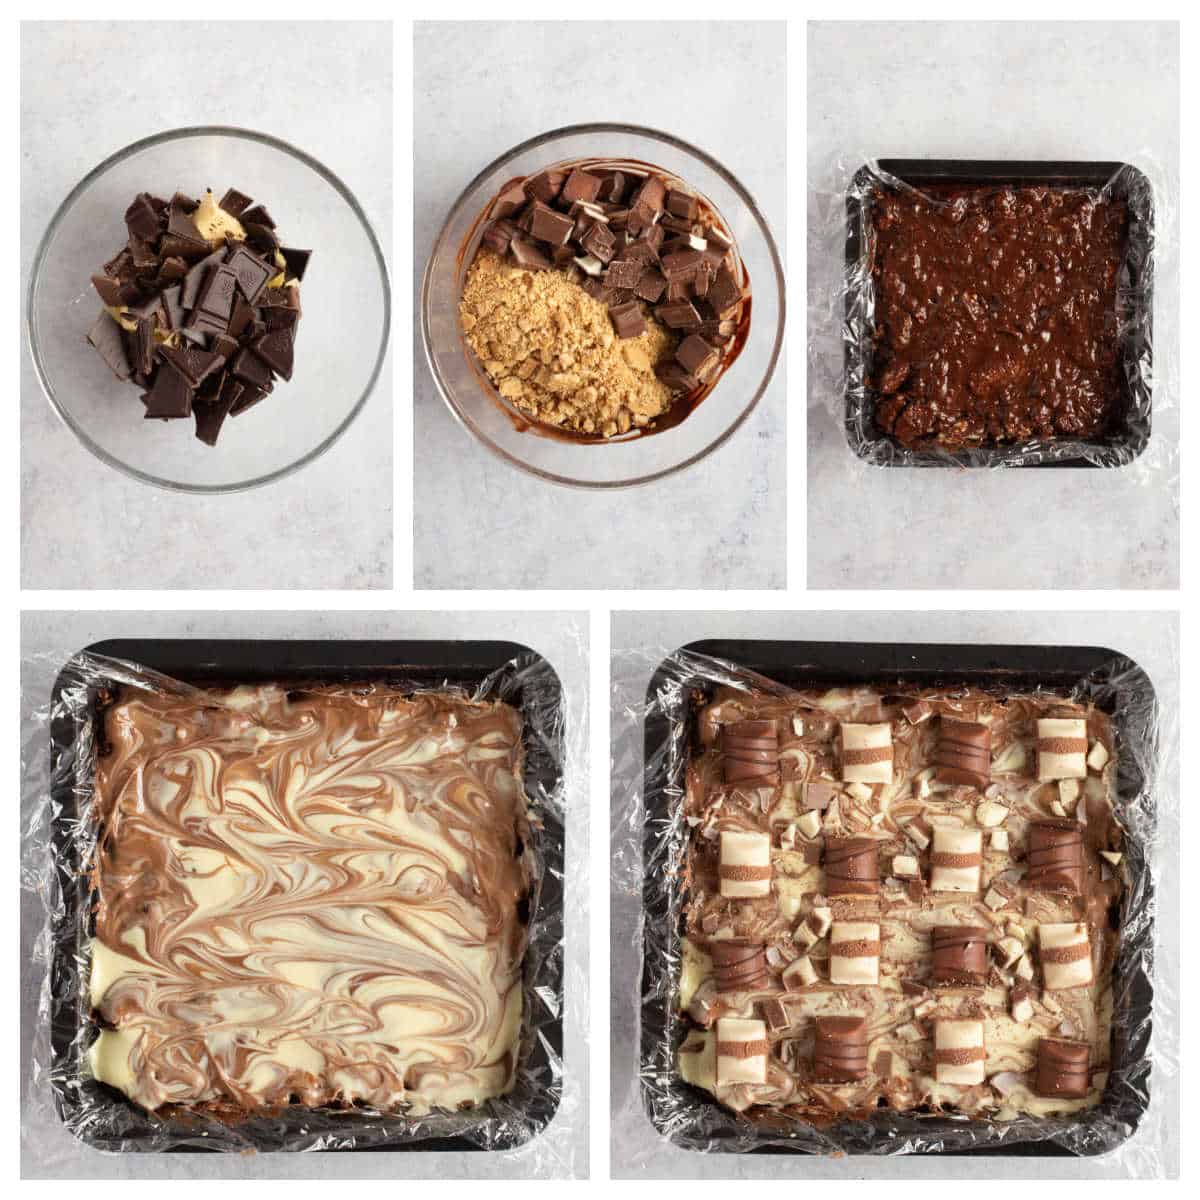 Step by step photo instruction collage for making Kinder Bueno tiffin bars.